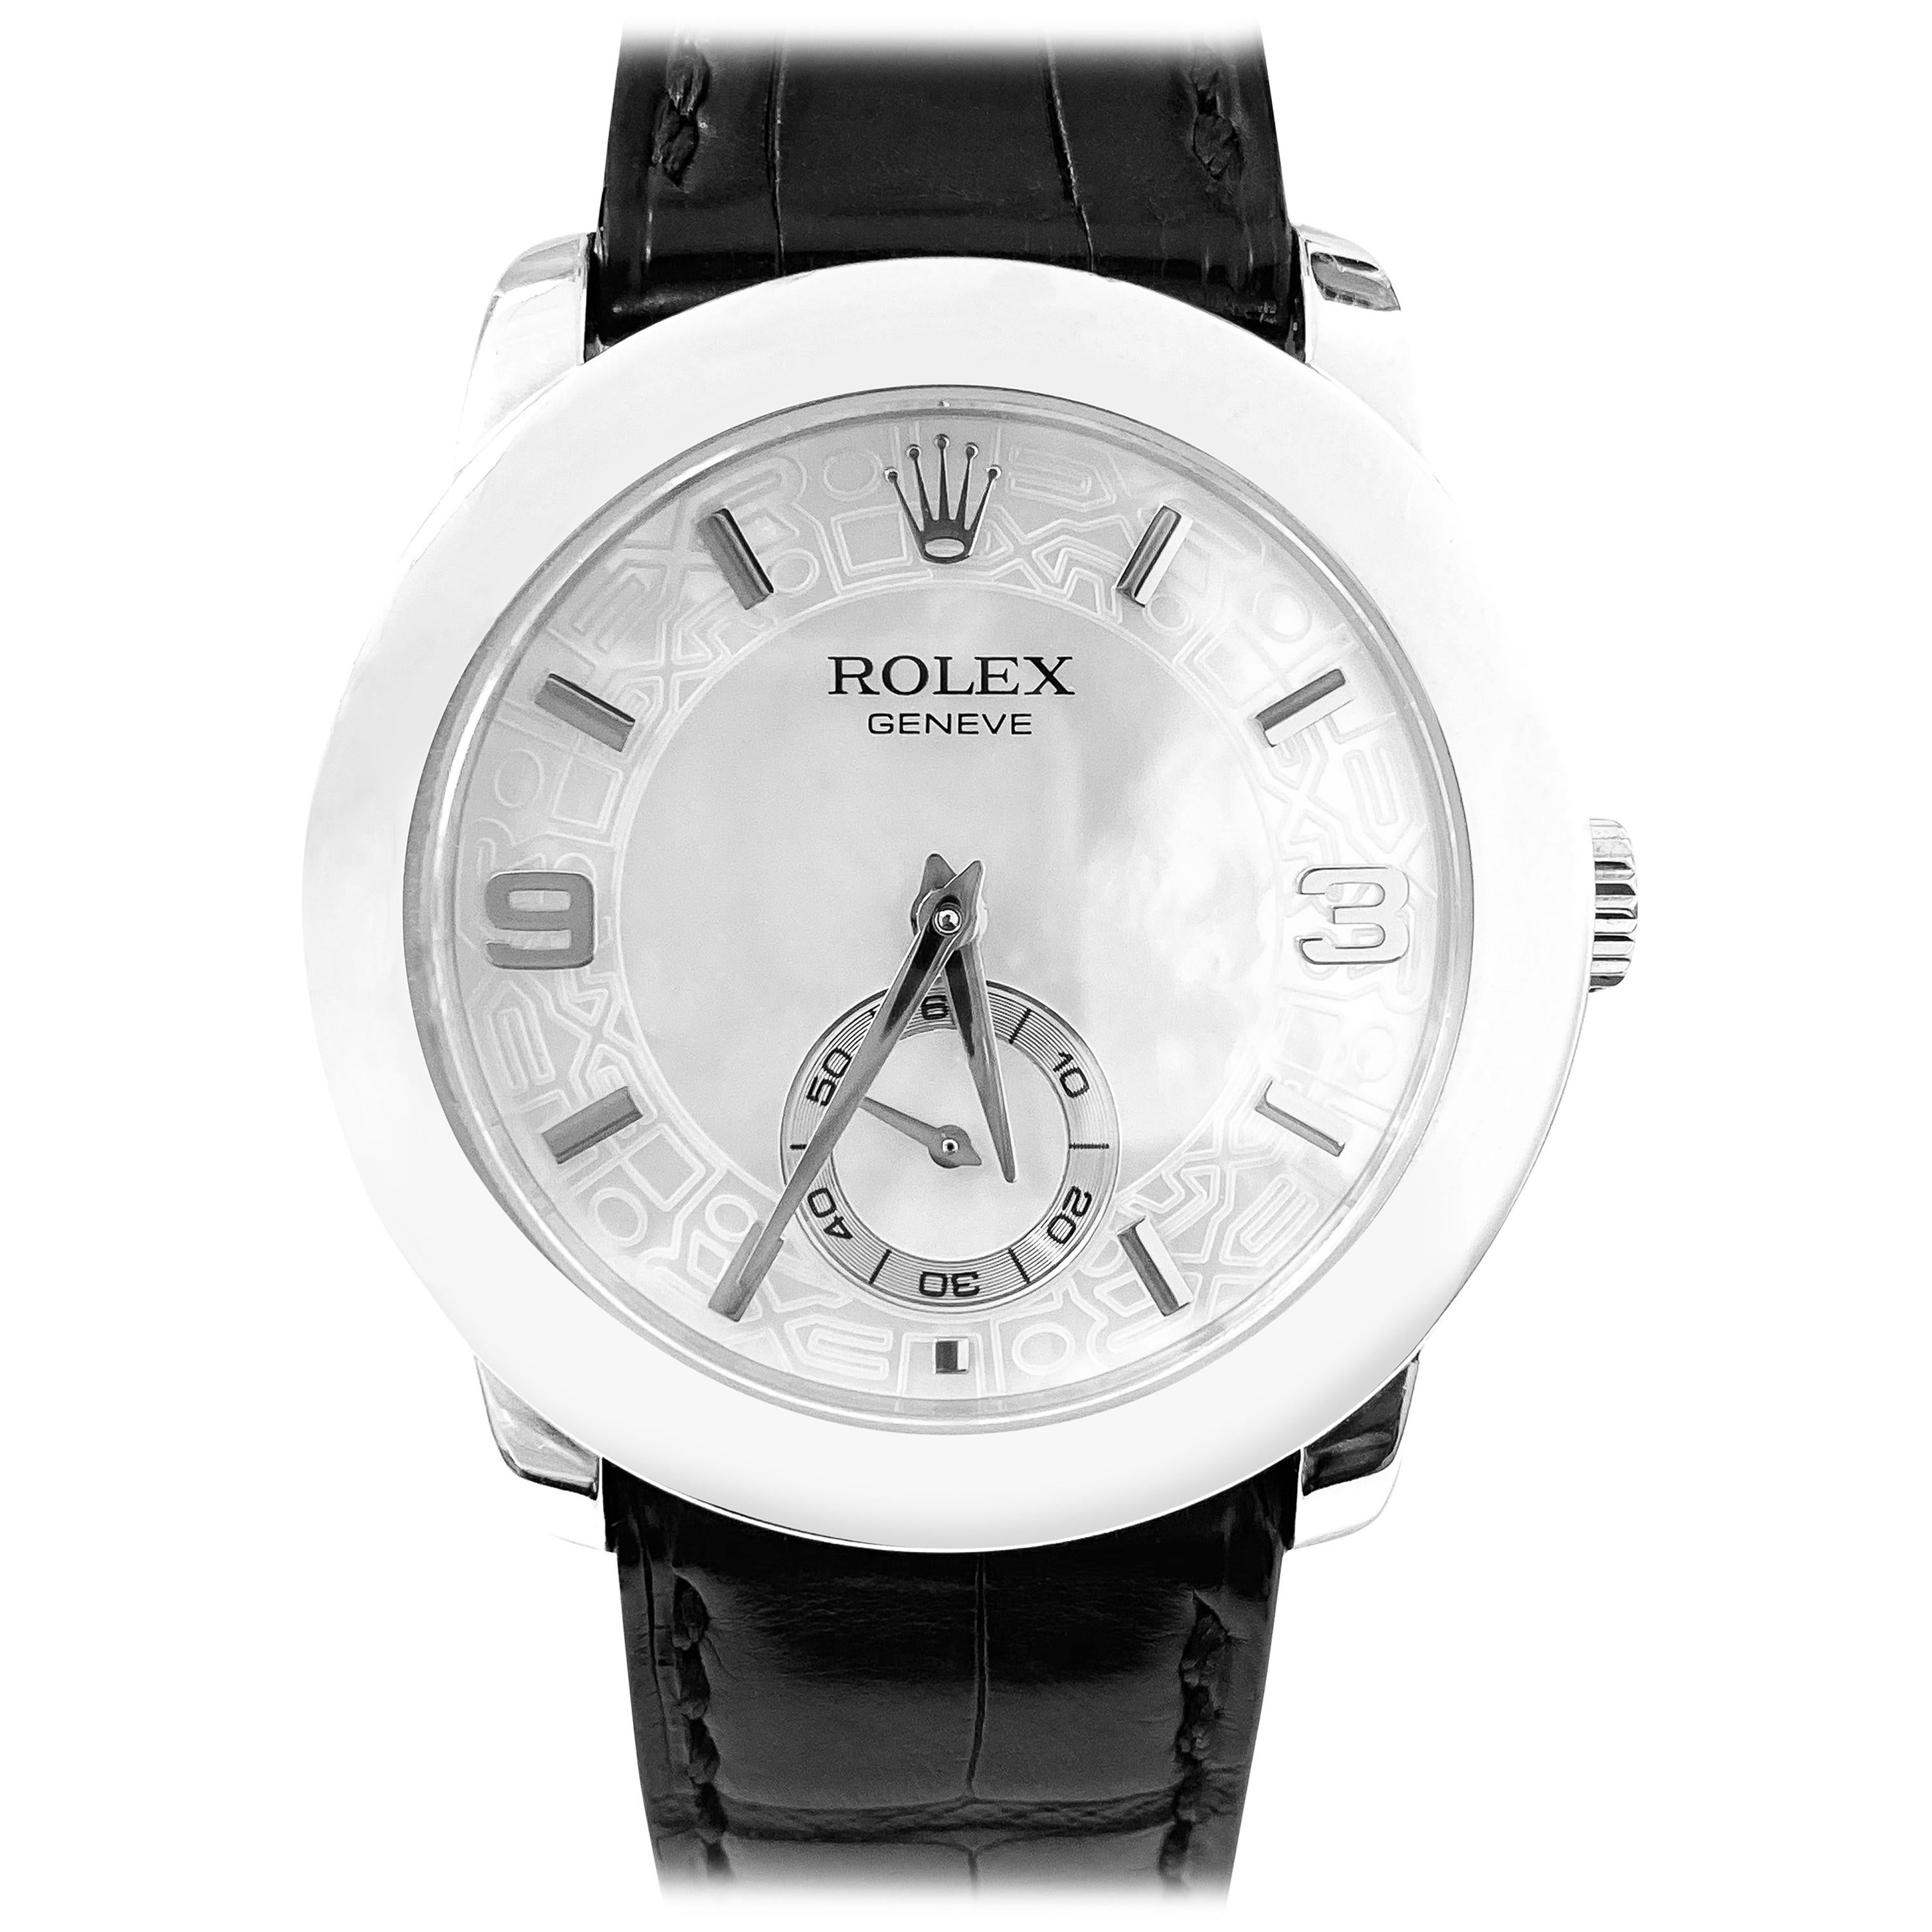 Rolex Cellini Platinum Men's Watch 5240 Mother of Pearl Dial